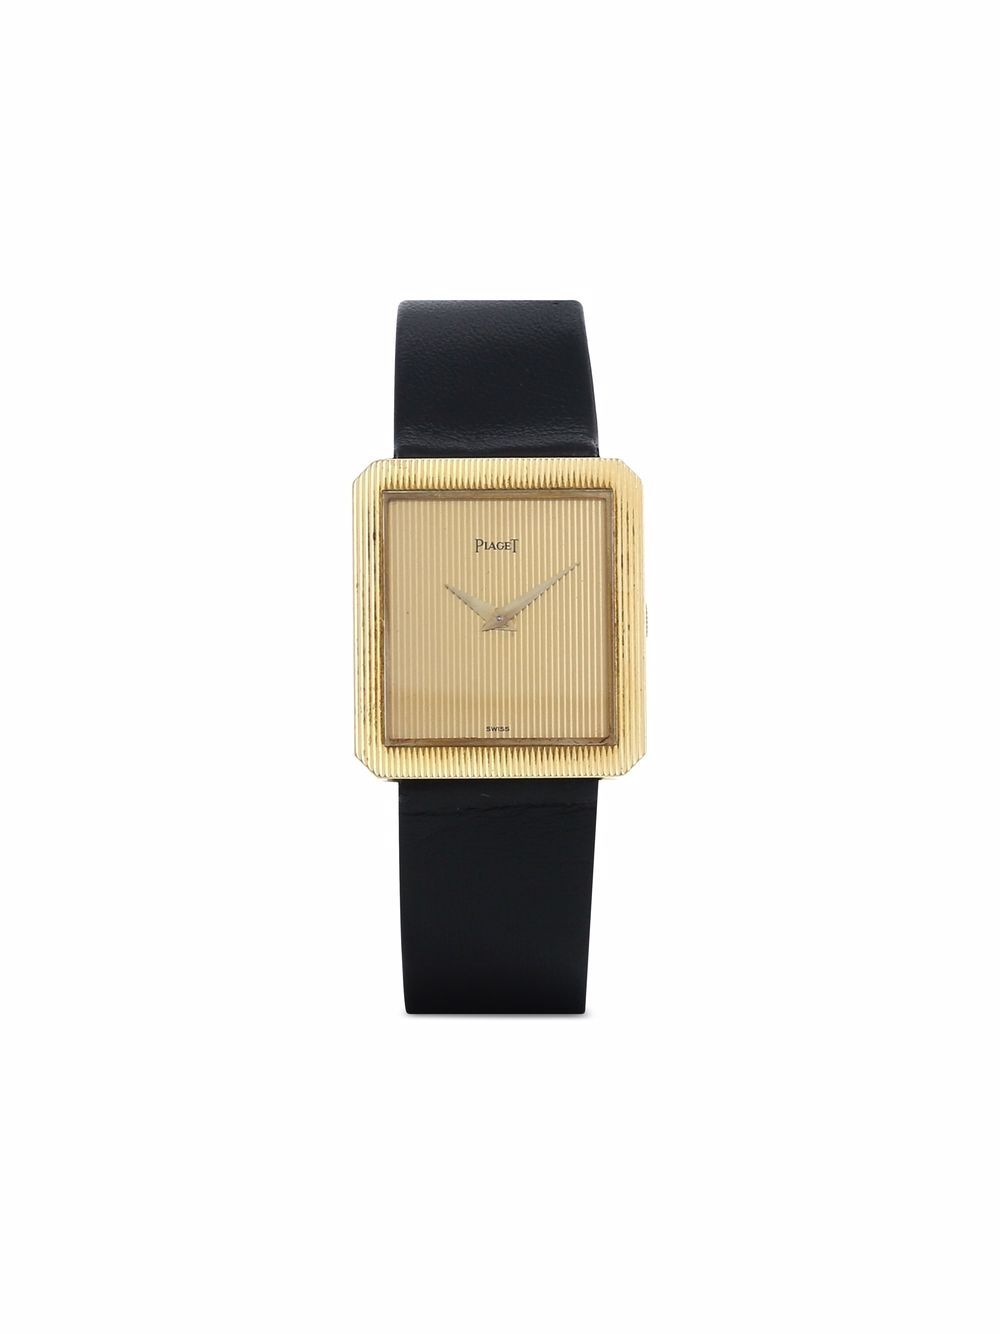 фото Piaget 1970 pre-owned protocole 25mm